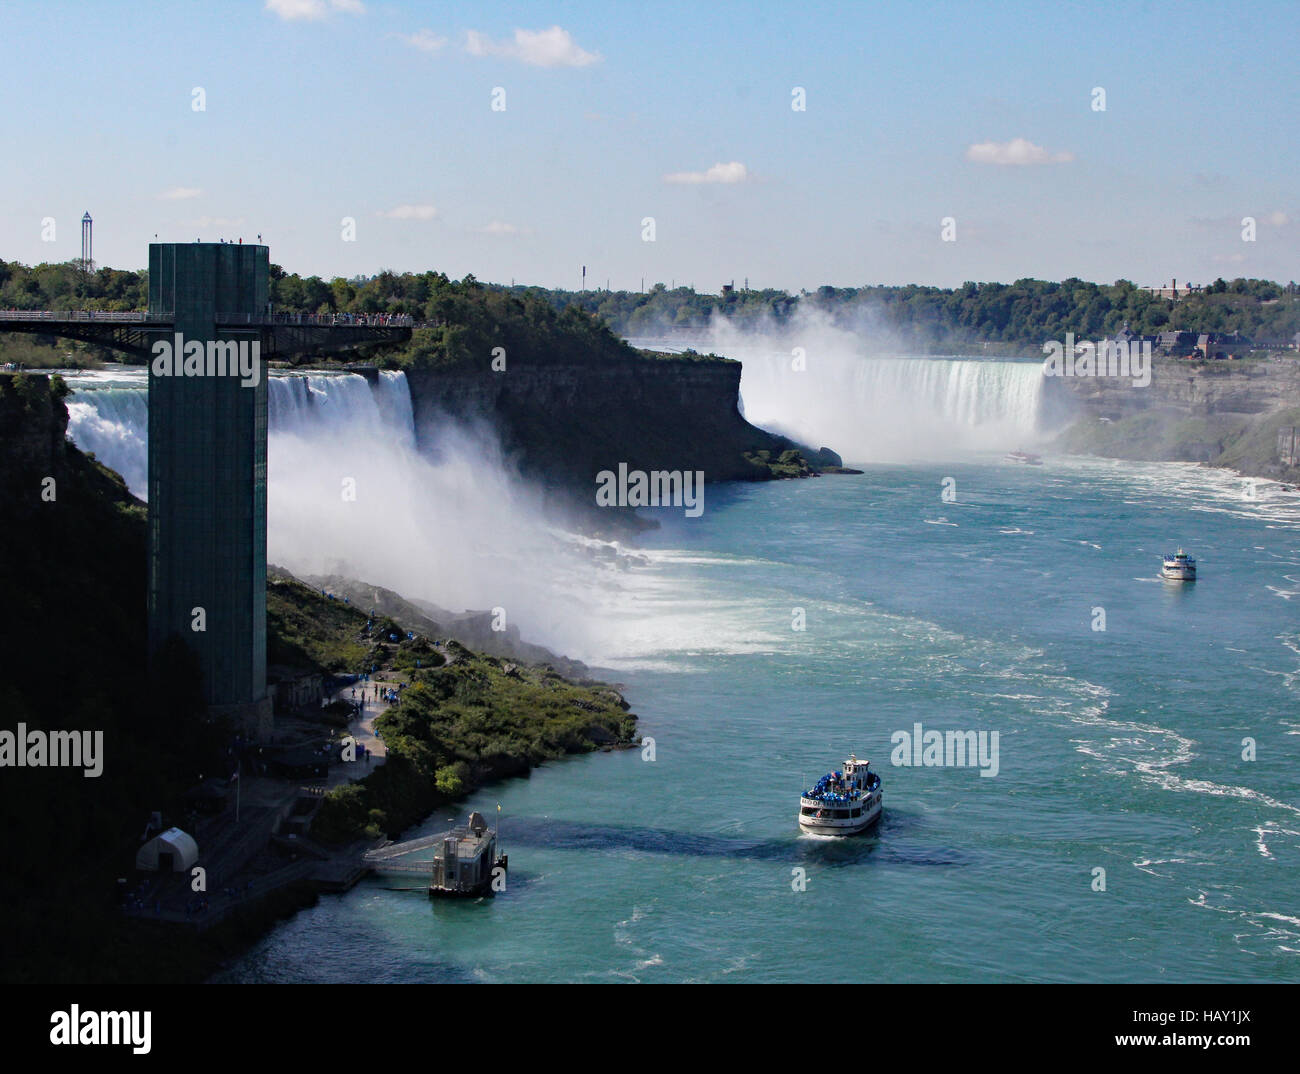 View of both the American and Canadian Falls at Niagara Falls from the Rainbow Bridge connecting New York and Ontario sides Stock Photo